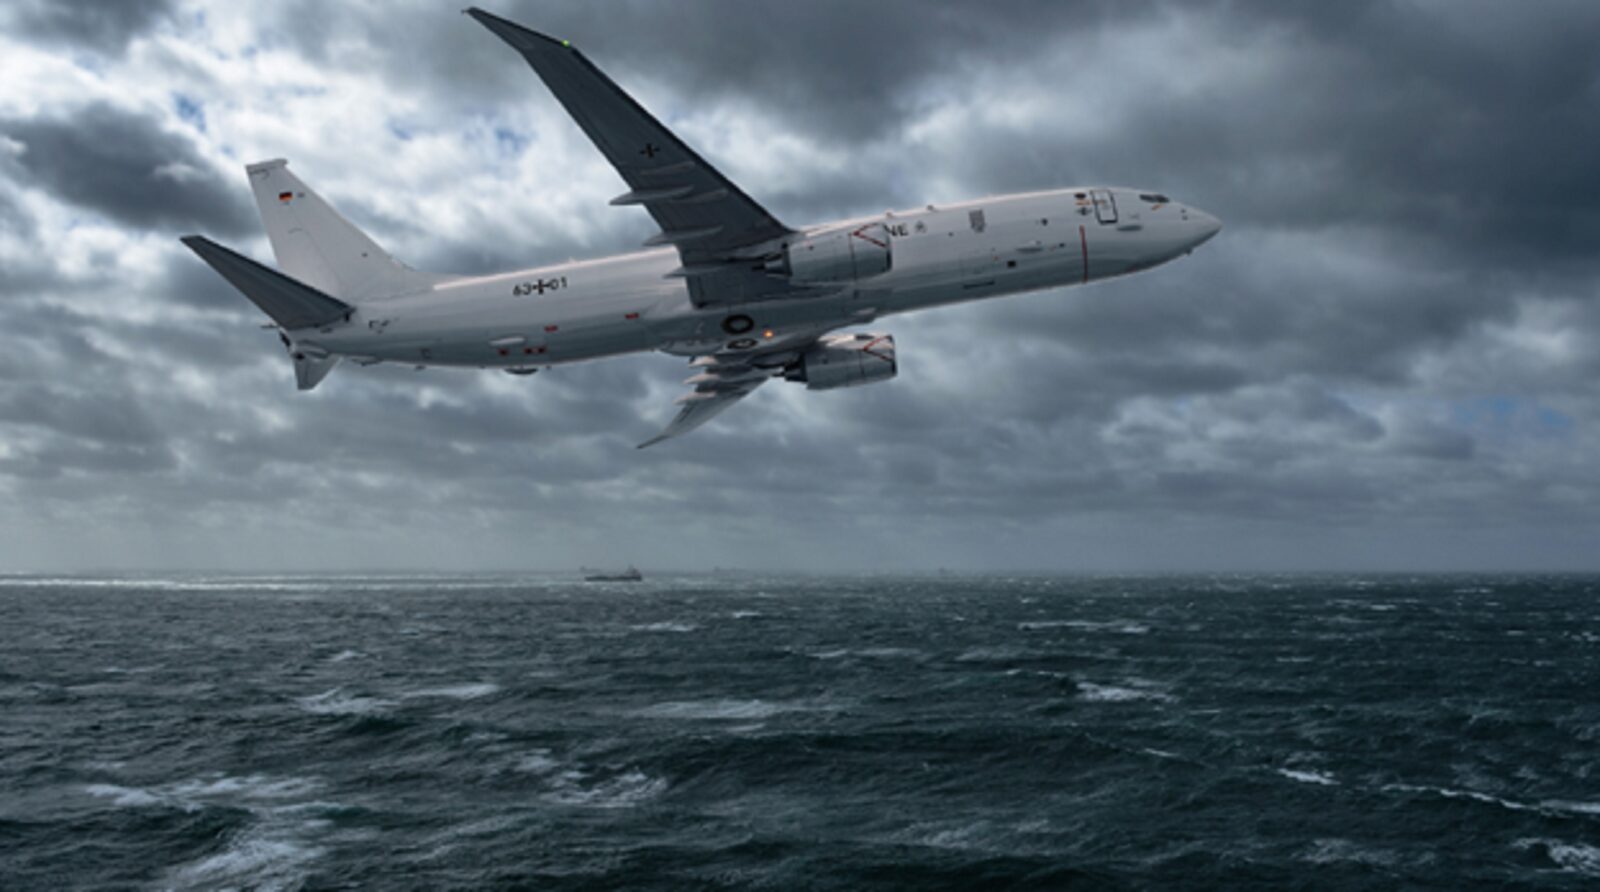 Boeing Awarded $3.4 Billion Contract for 17 P-8A Poseidon Aircraft